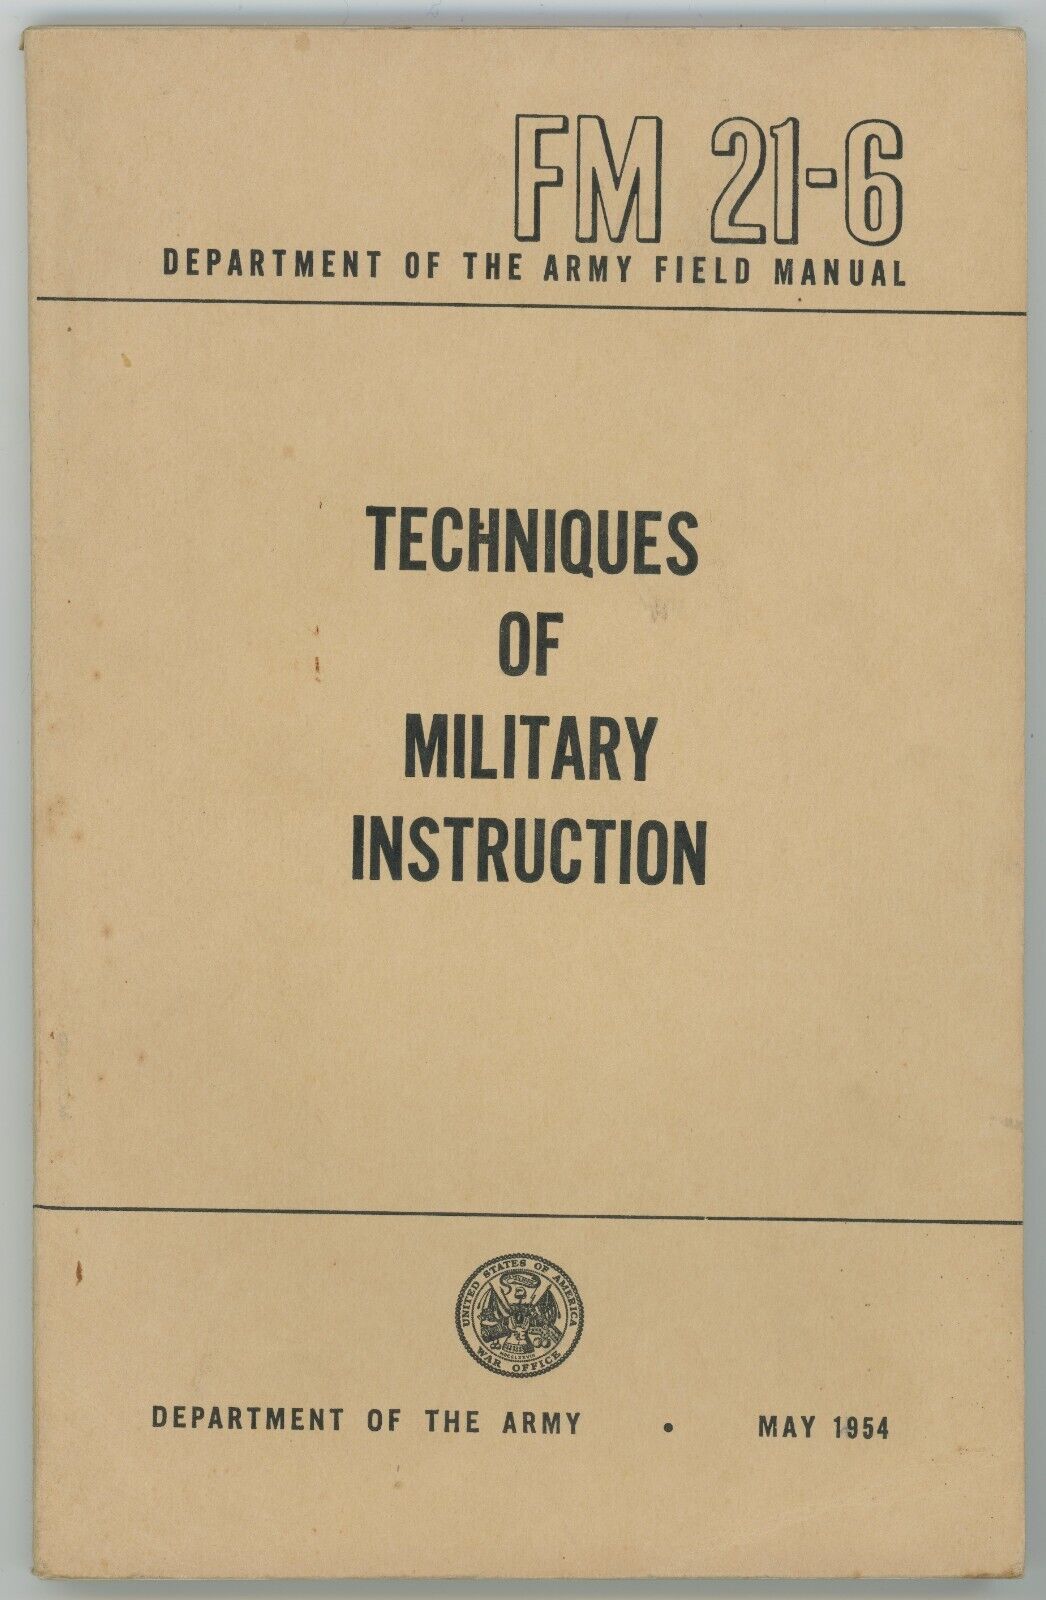 Techniques of Military Instruction US Army FM 21-6 Field Book 1954